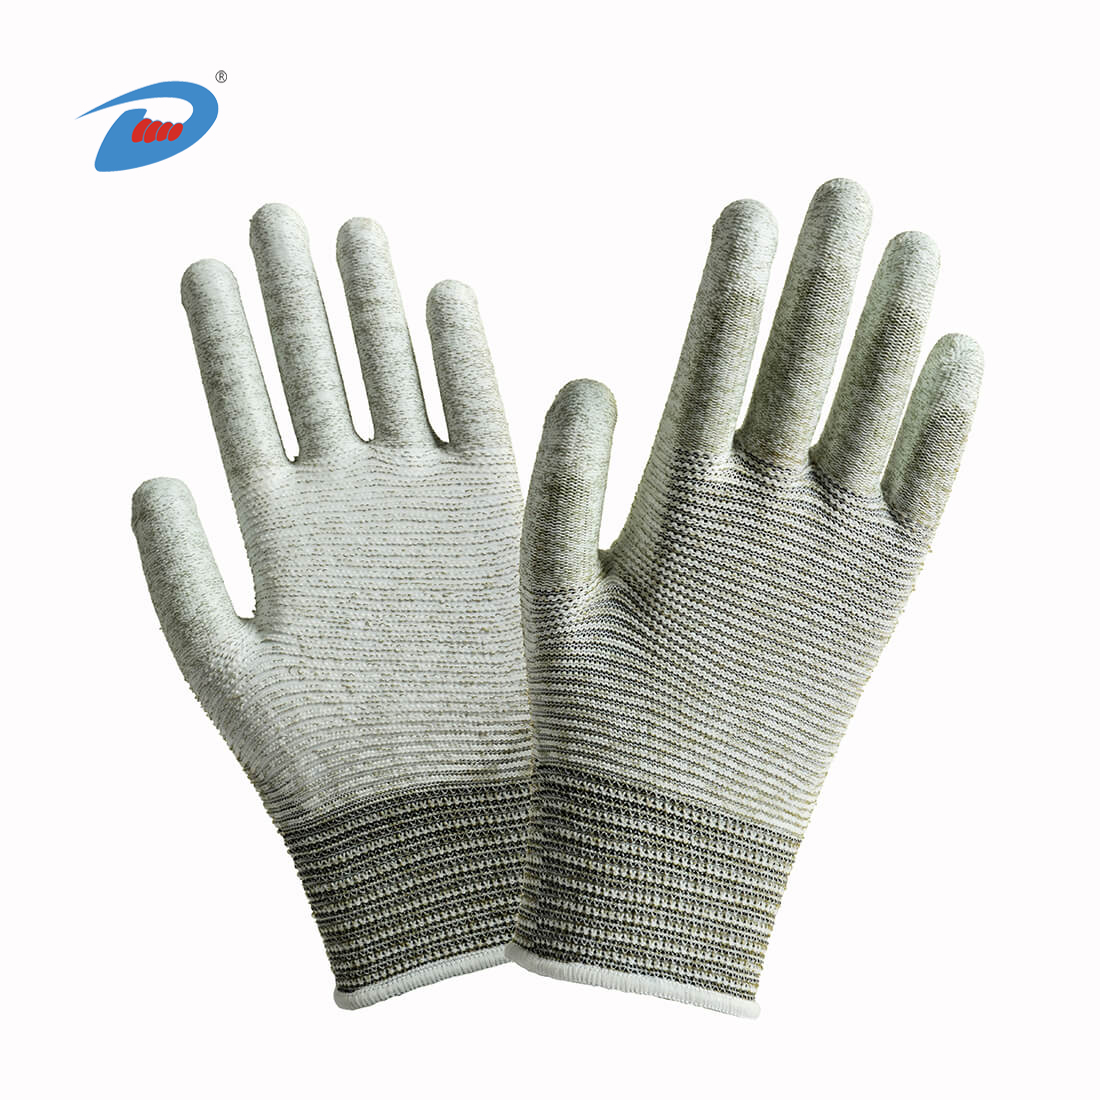 What are the characteristics of commonly used PU coated gloves?